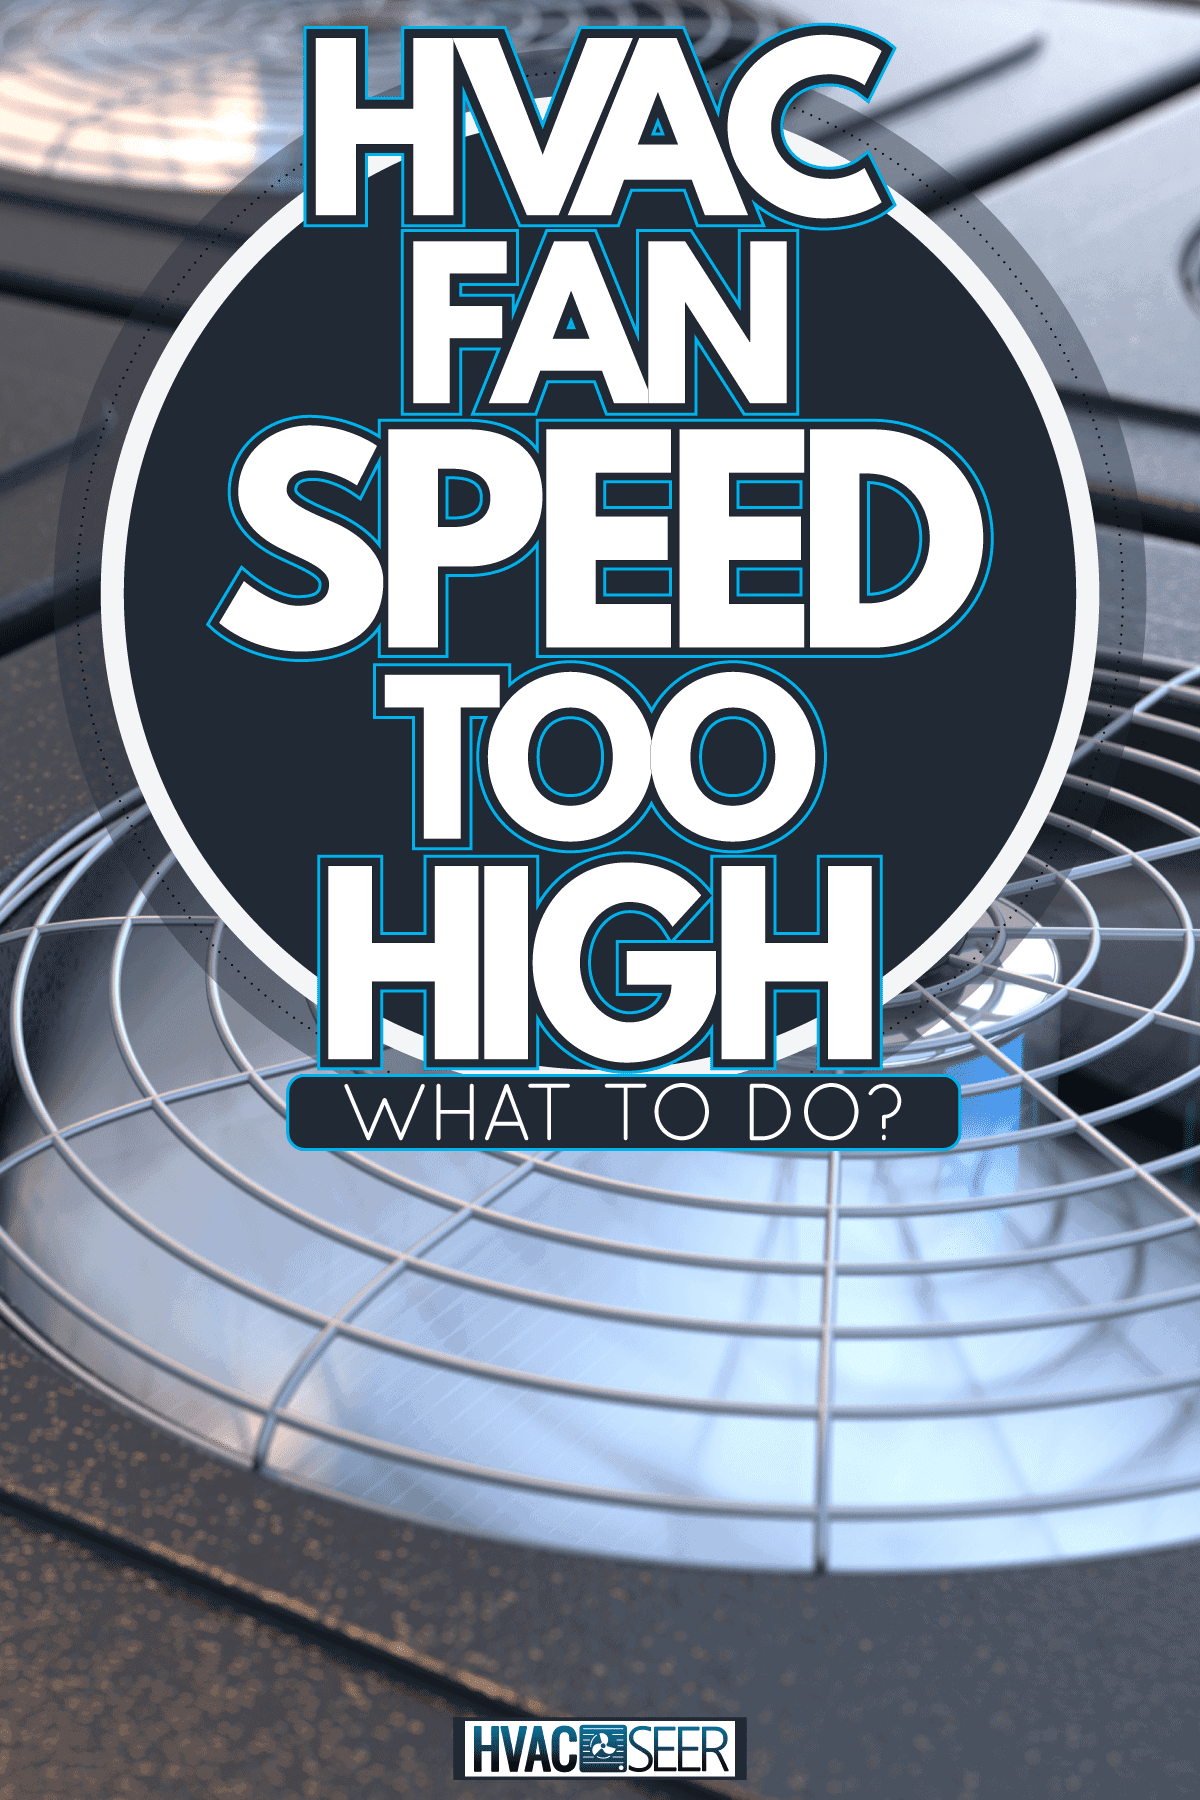 Hvac system fan runs to high for an amount of time might cause malfunction, HVAC Fan Speed Too High: What To Do?